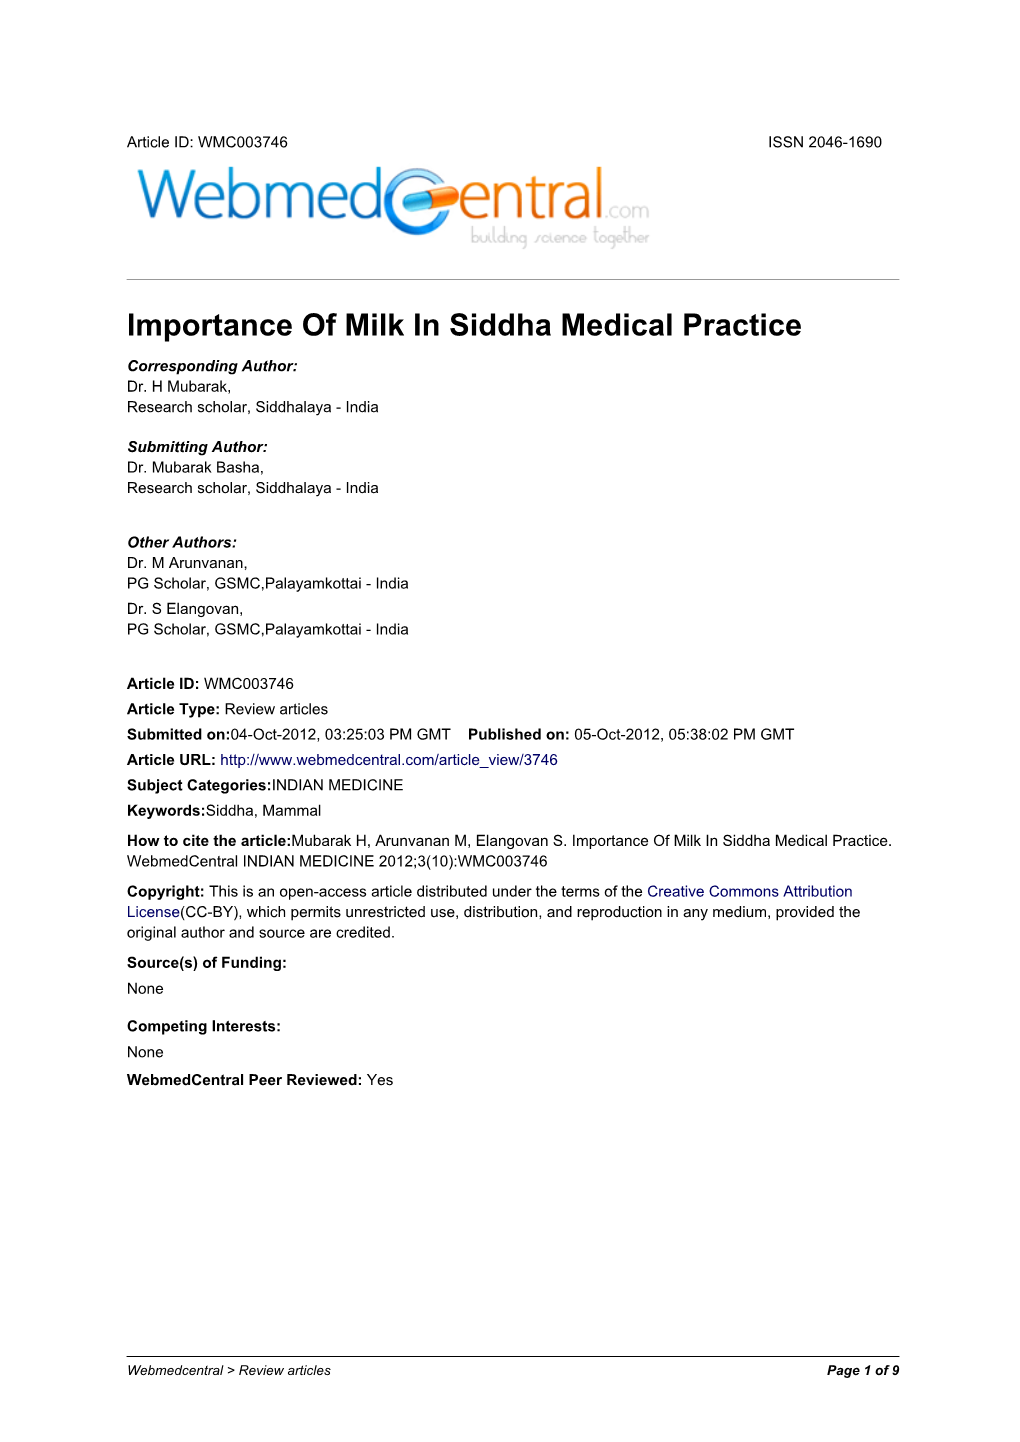 Importance of Milk in Siddha Medical Practice